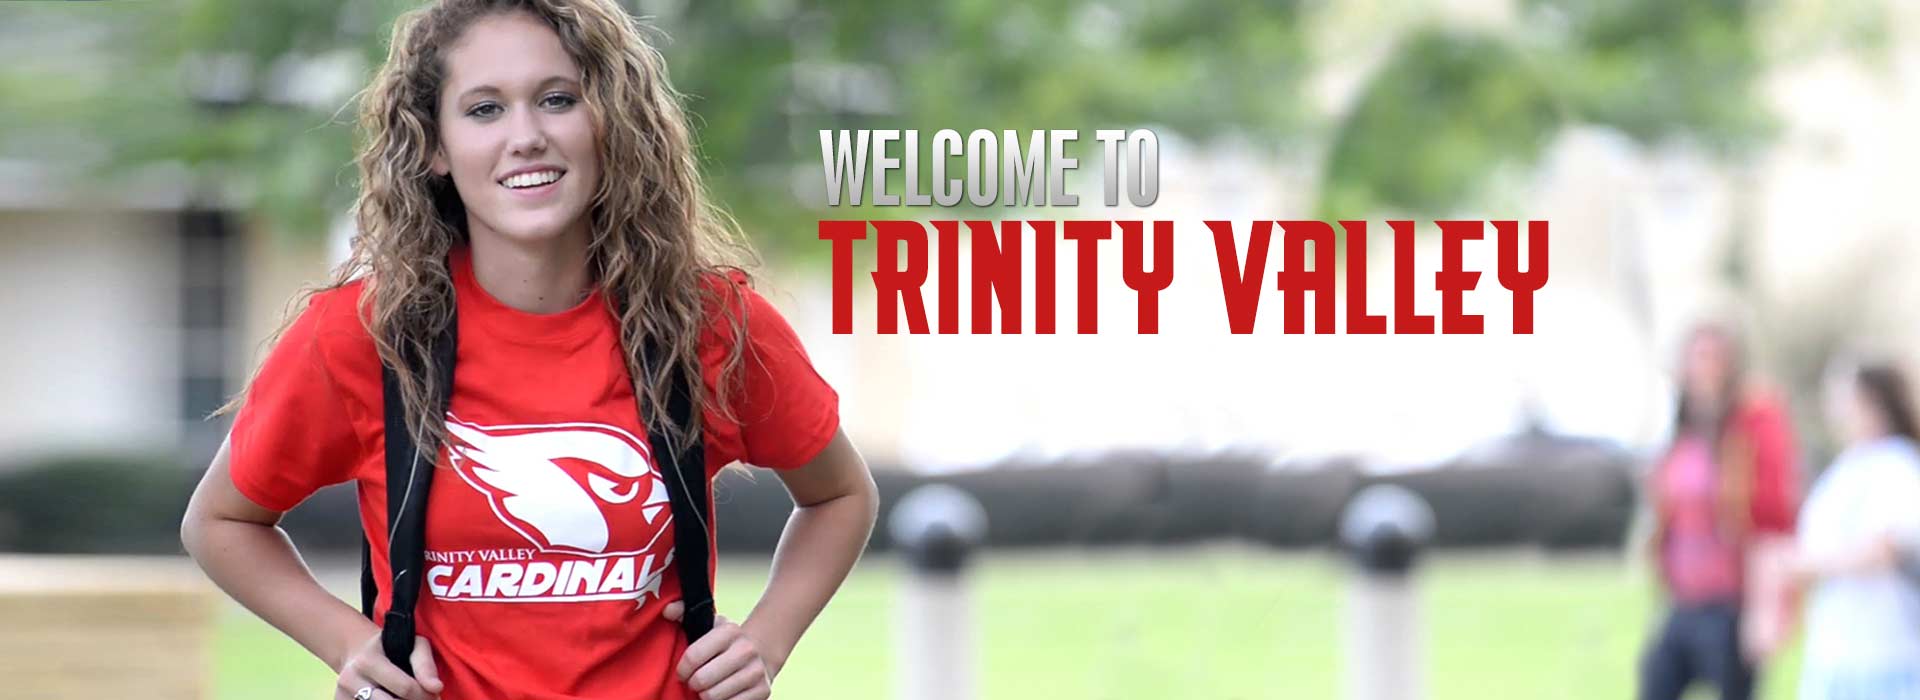 Welcome to Trinity Valley 